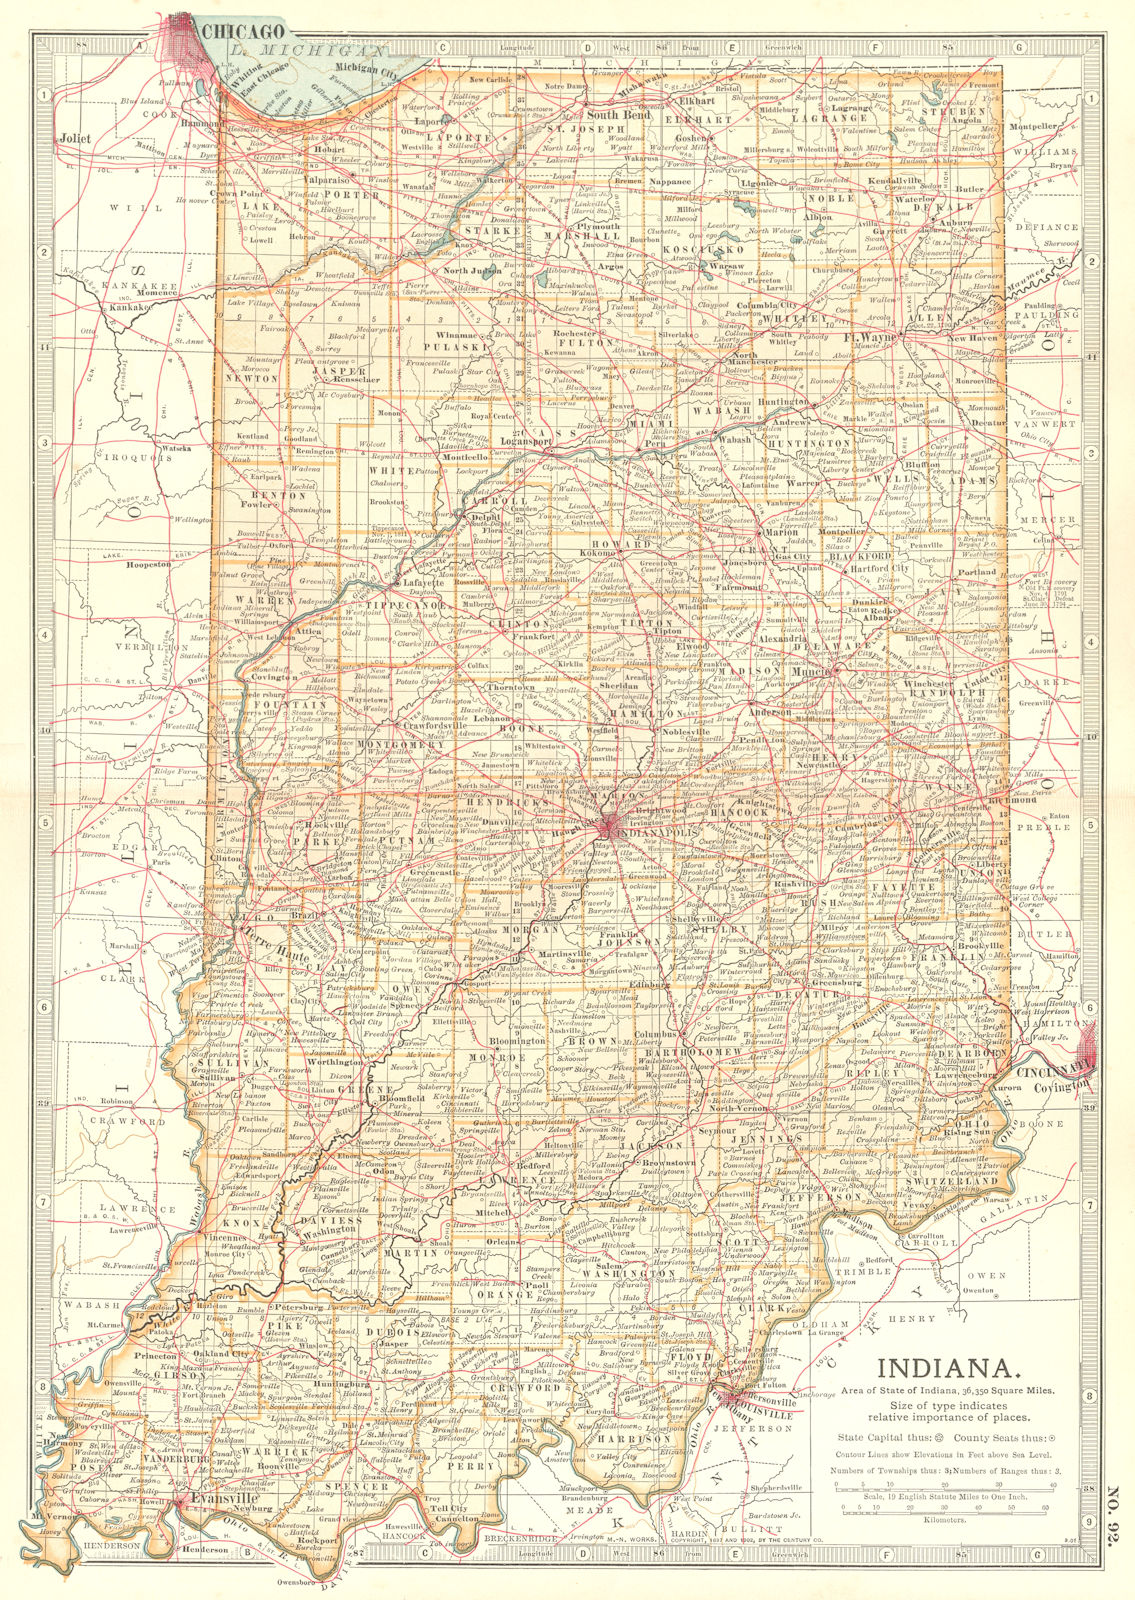 Associate Product INDIANA. state map showing counties & some battlefields/dates 1903 old